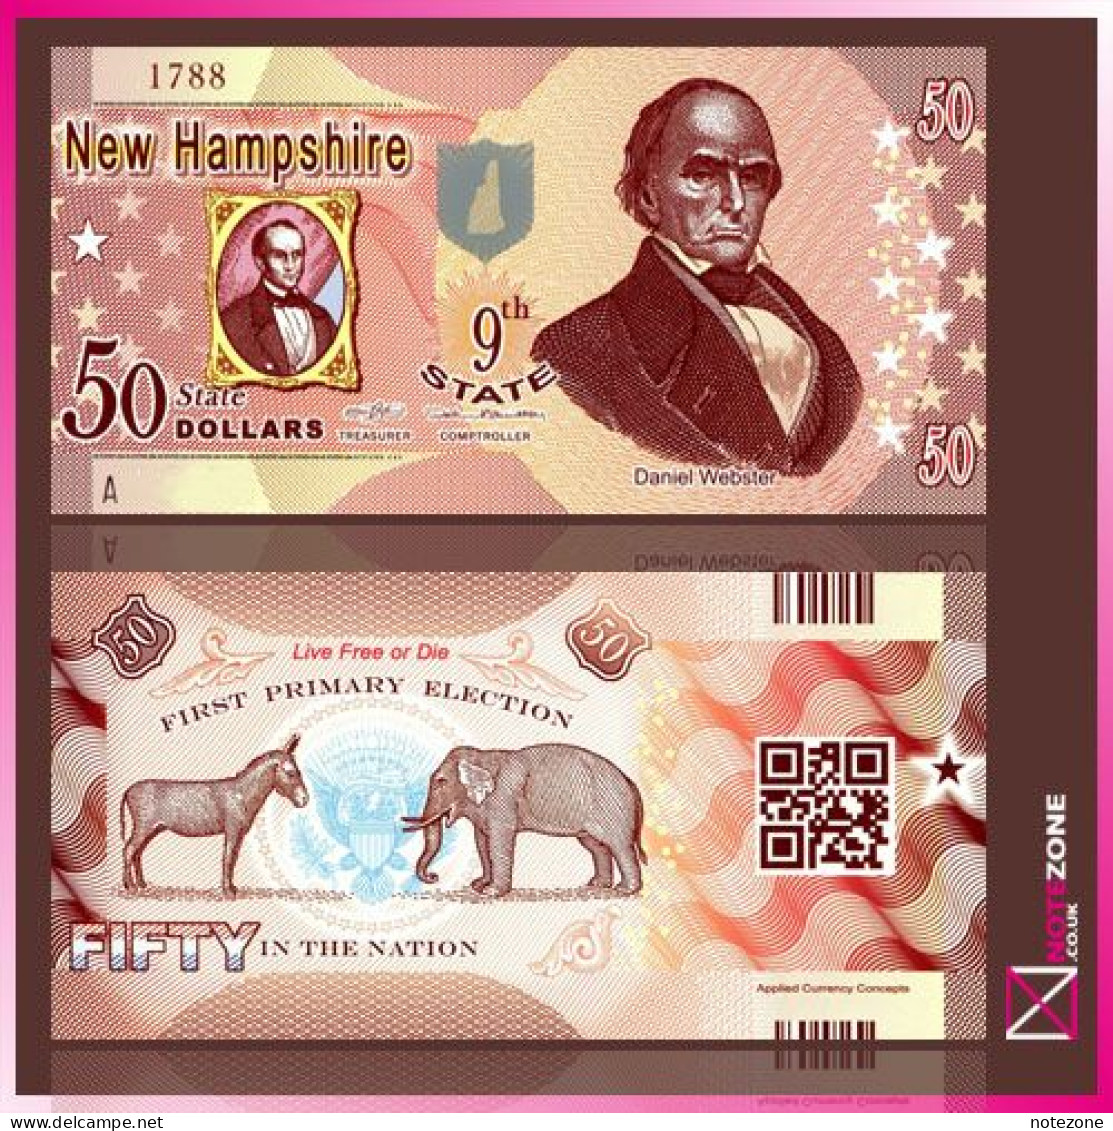 Thomas Stebbins USA $50 STATES New Hampshire 9th State Daniel Webster Polymer Fantasy Private Banknote Note - Collections